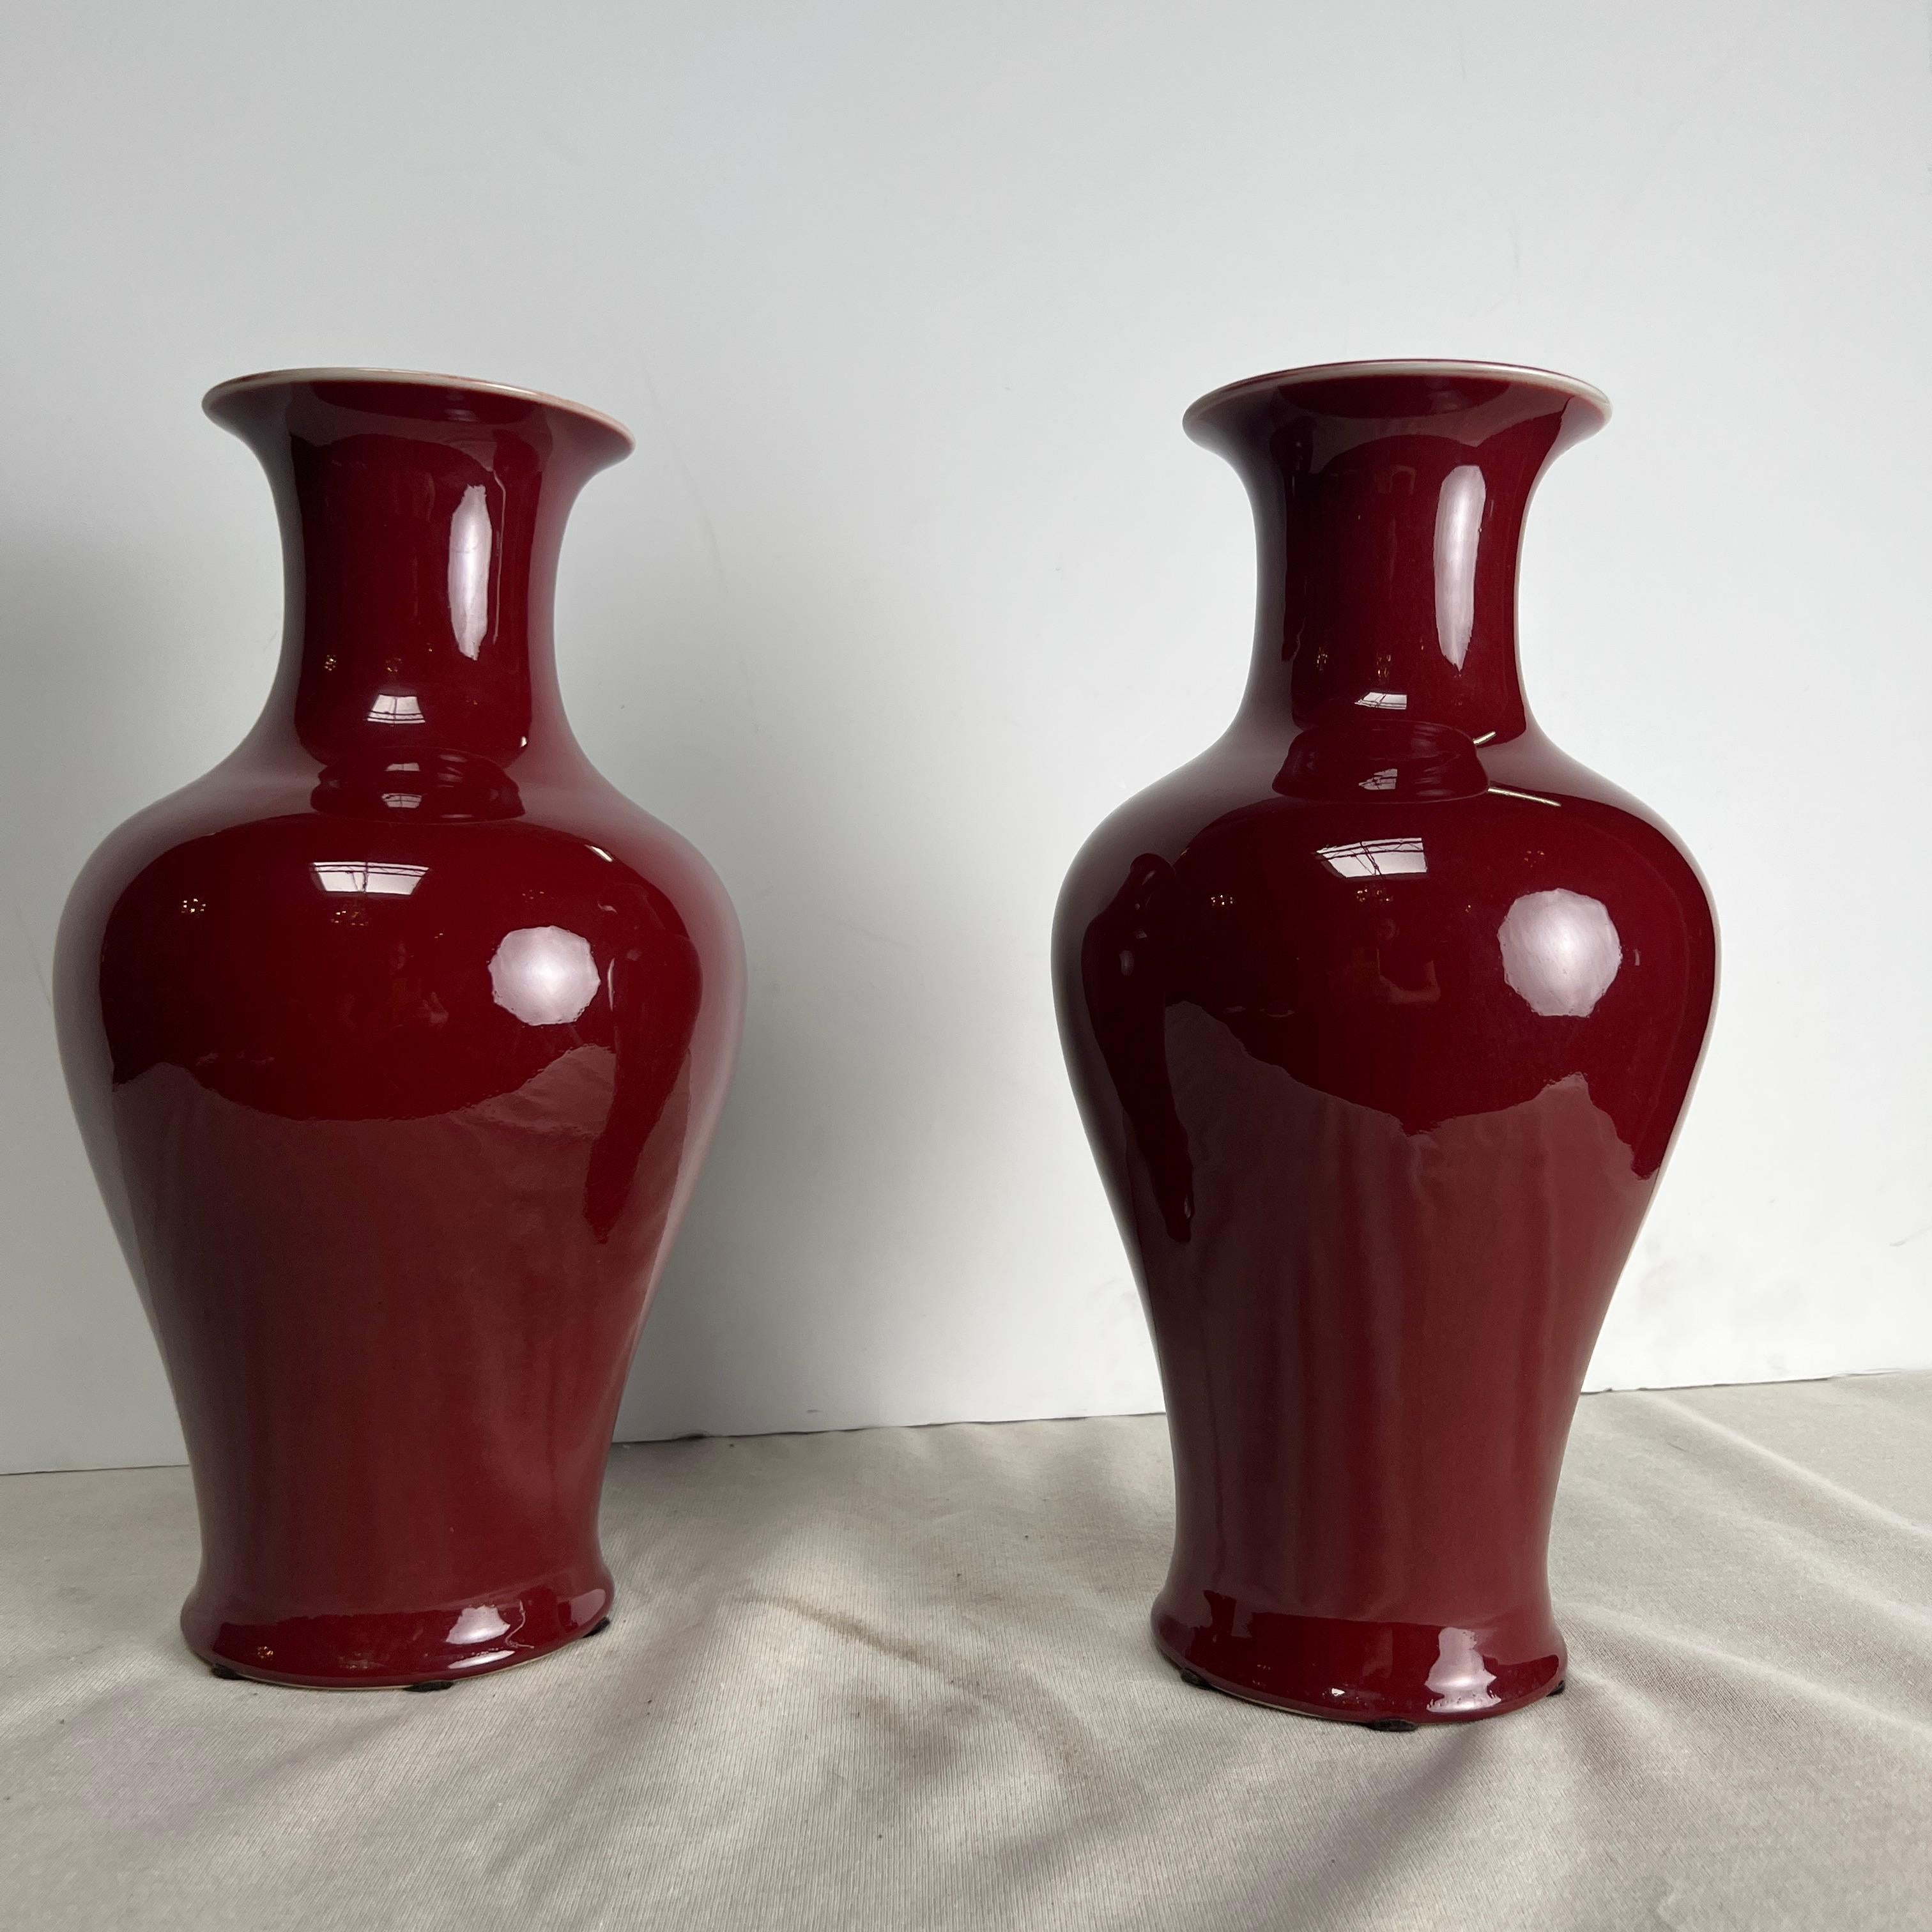 A pair of Chinese porcelain vases with an oxblood, red, sang de boeuf glaze. These large vases are very decorative and would make a great pair of lamps or vases.  